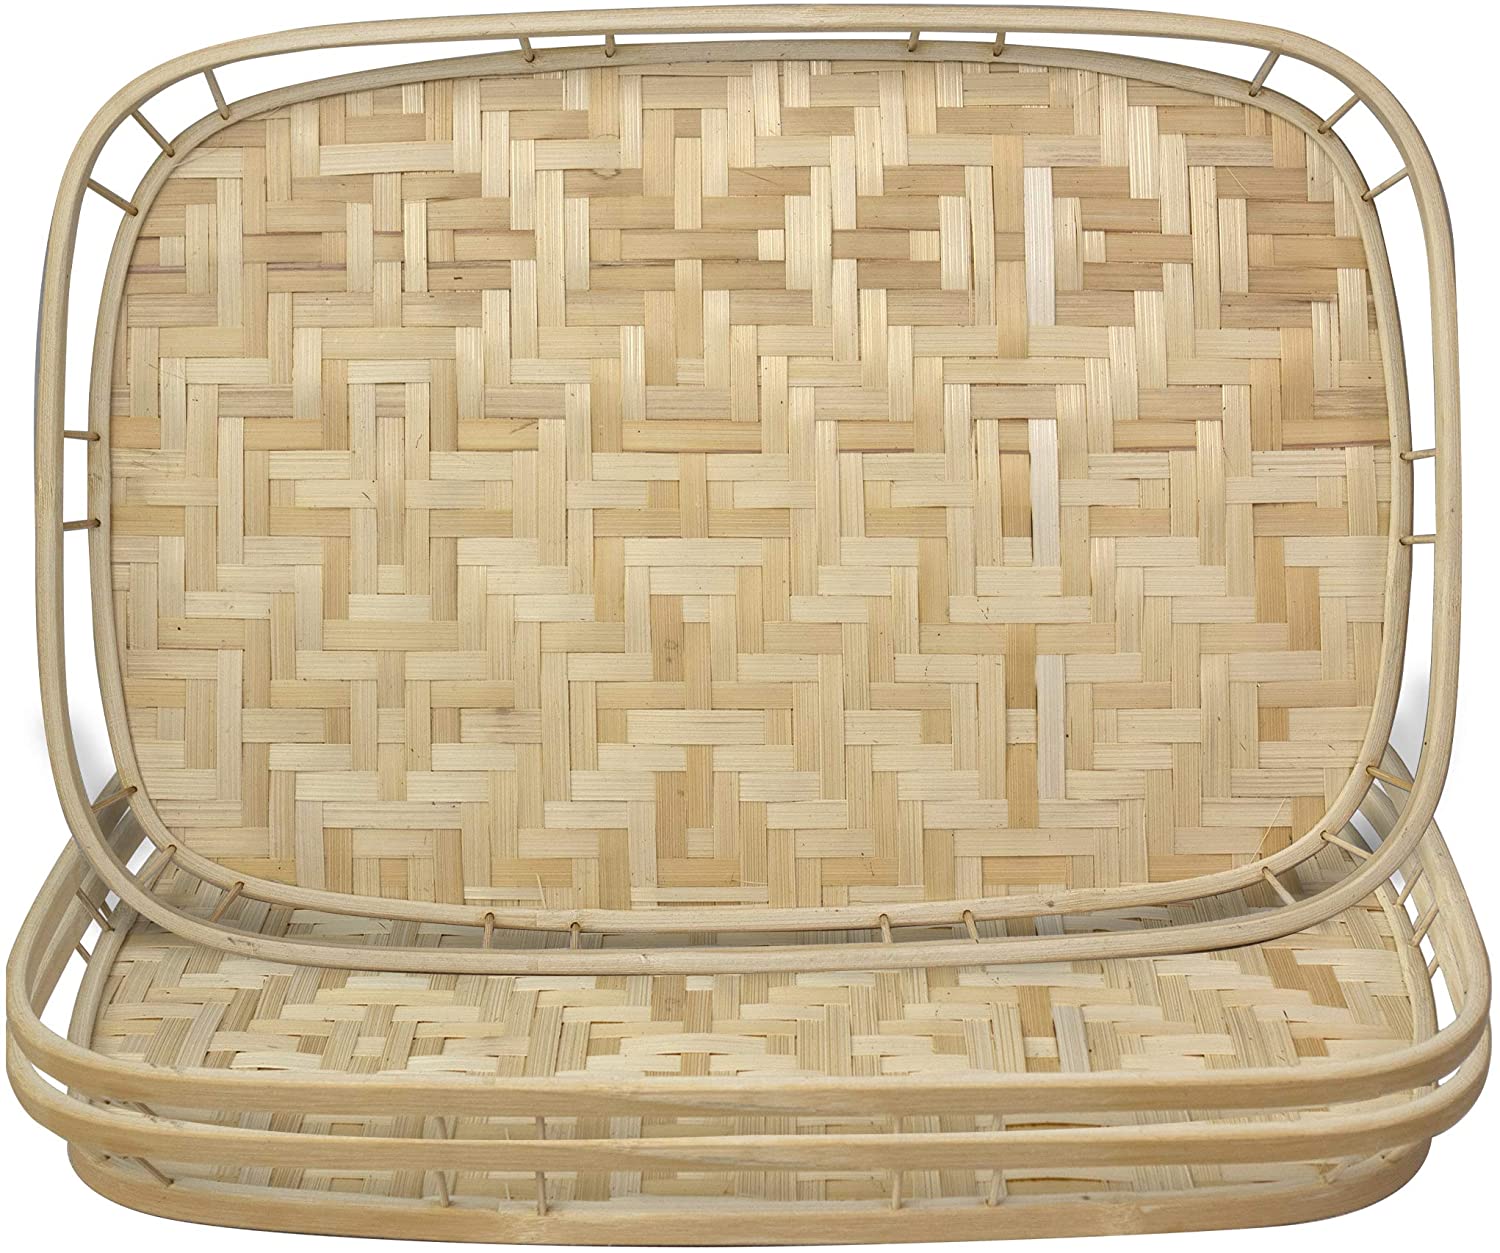 Bamboo Wicker Serving Trays with Handles | Handwoven & Decorative Trays for Dining Table - Almondscove